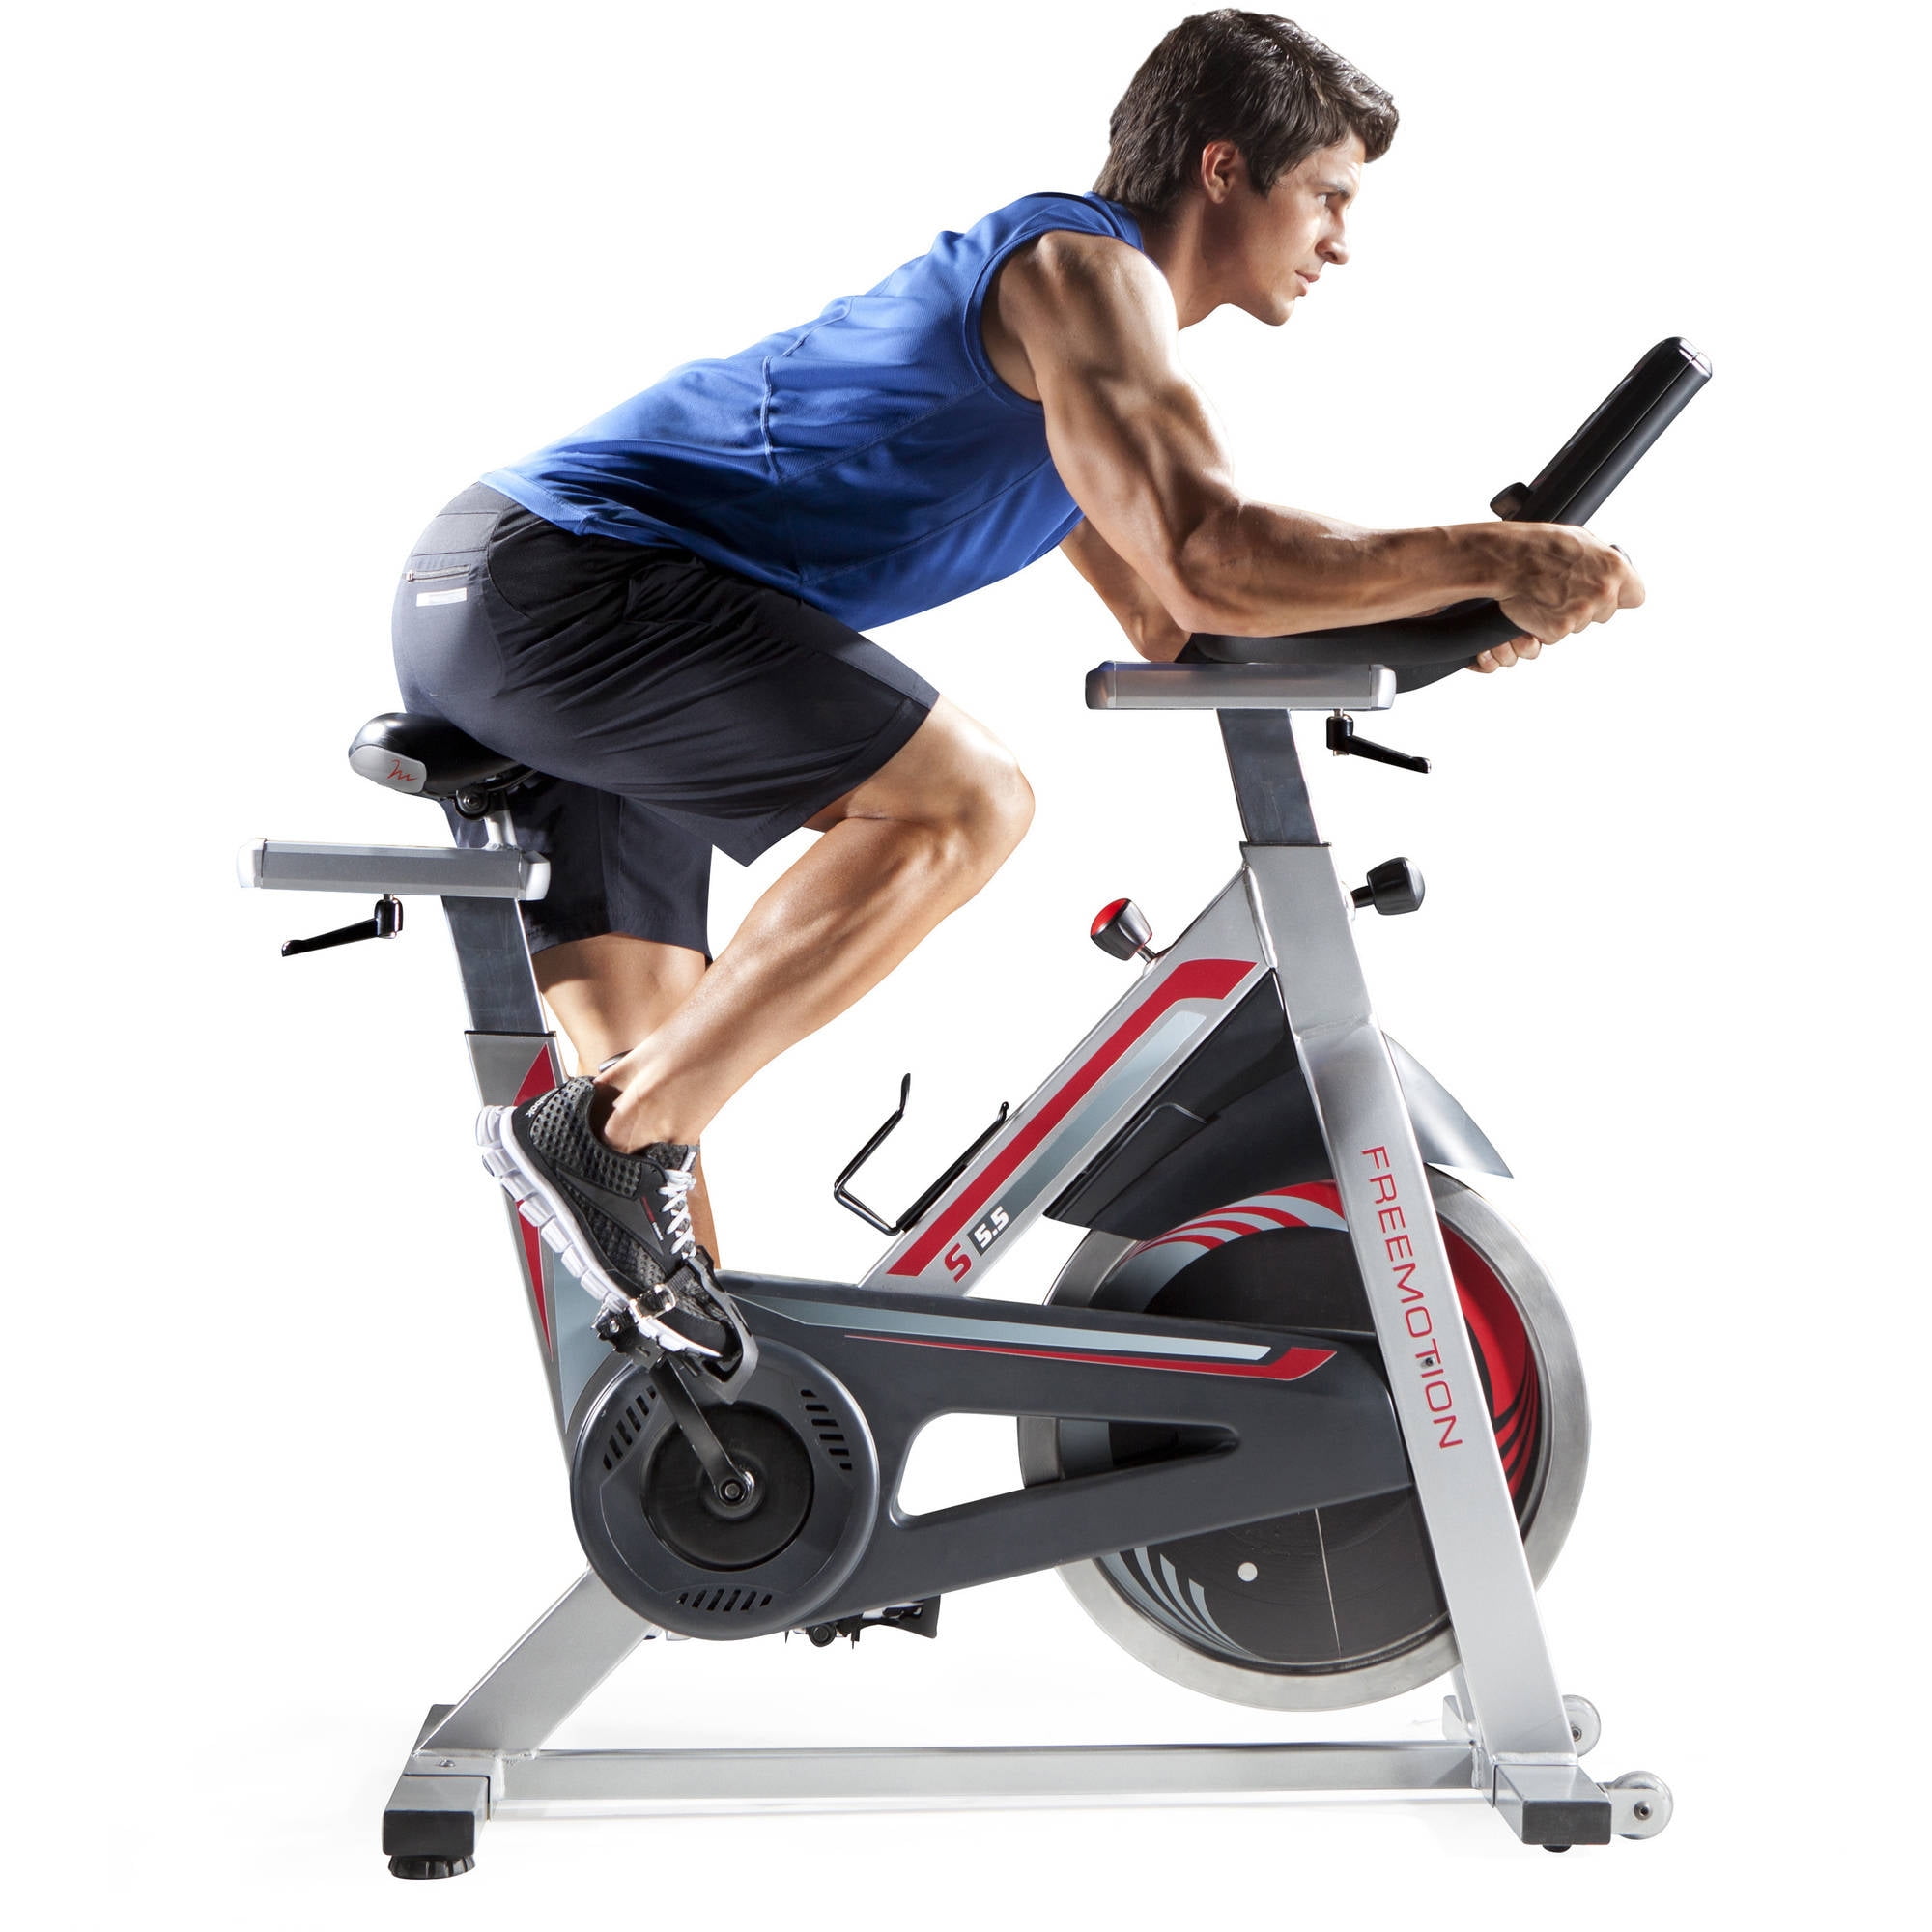 freemotion indoor cycle